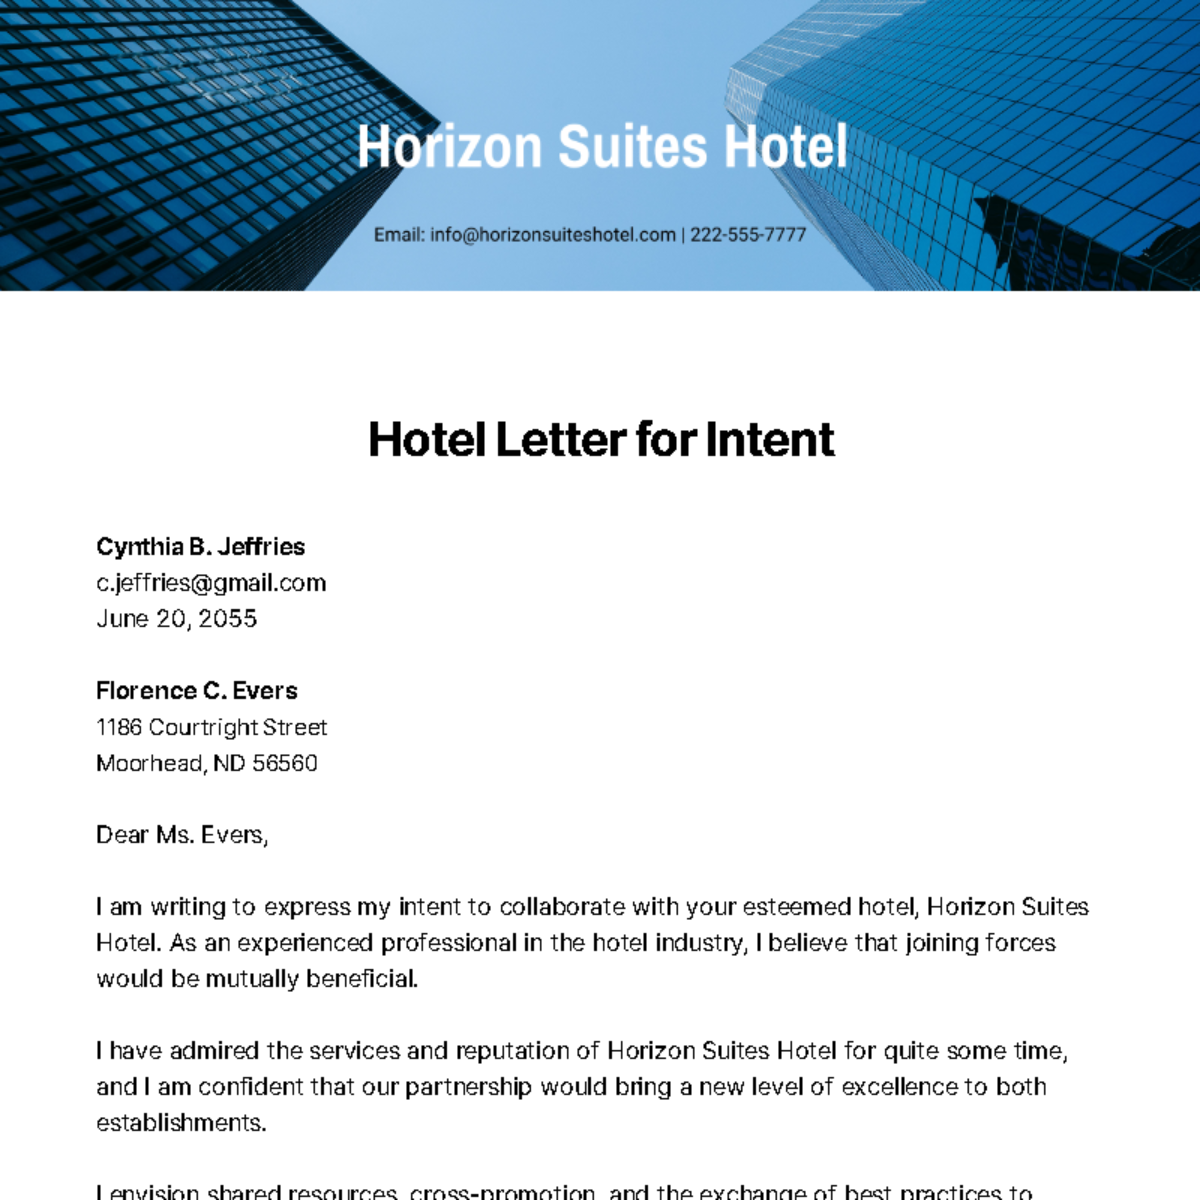 Hotel Letter of Intent   Template